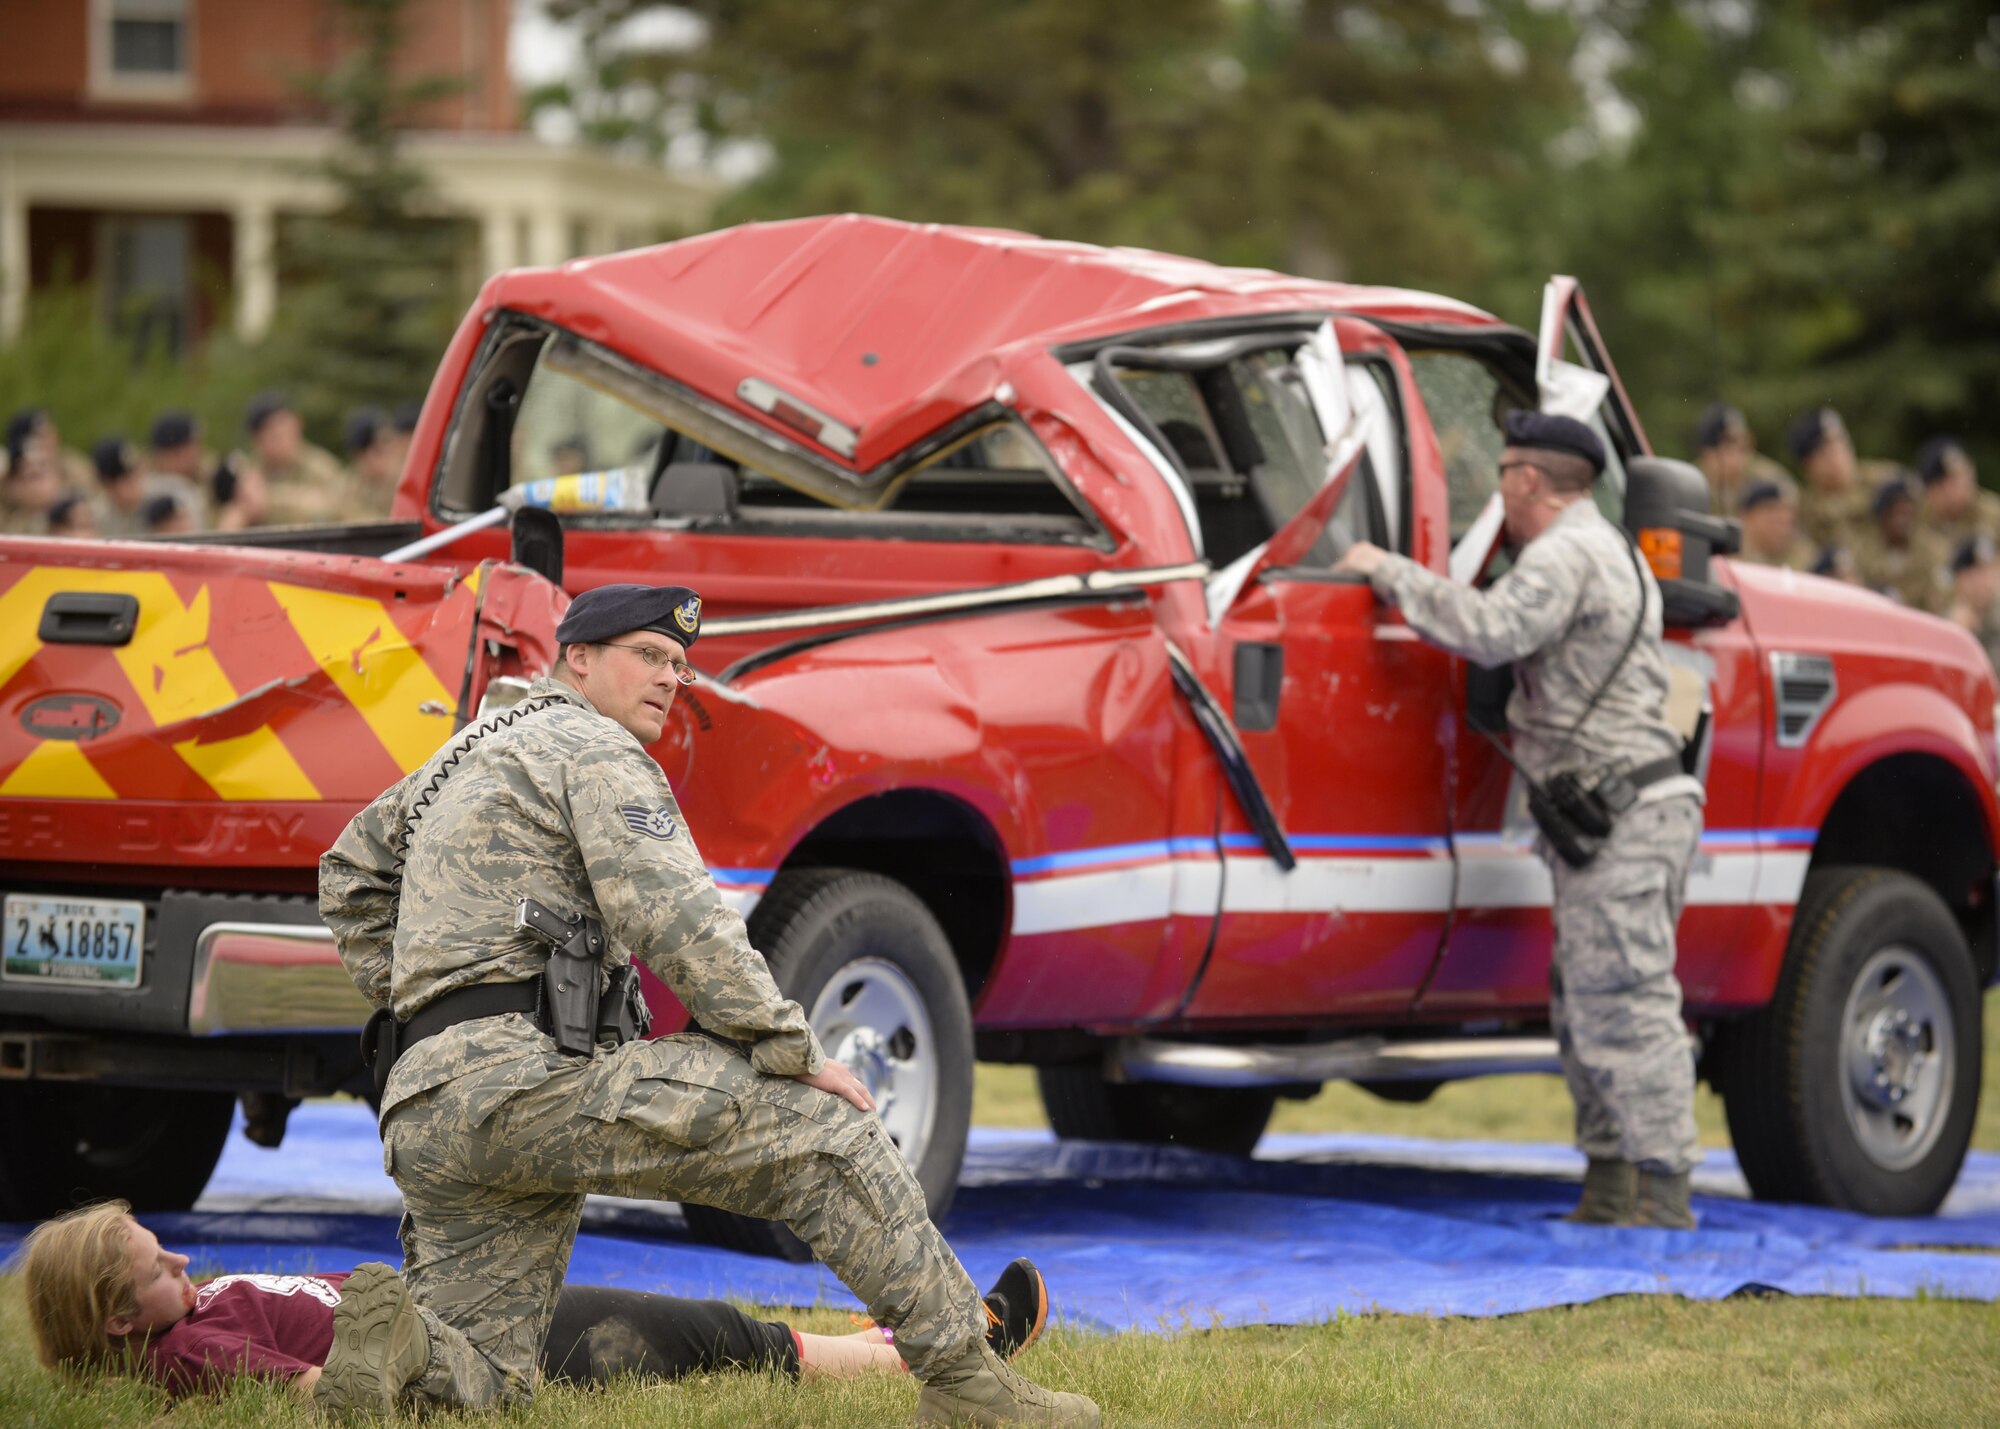 Staff Sergeants Taylor Patrick, left, and James Hebert, right, 90th Security Forces Squadron members, arrive at a crashed vehicle to assess the condition of Airman 1st Class Piper Whetstone, a 90th Civil Engineering Squadron firefighter, during a drinking and driving awareness event at F.E. Warren Air Force Base, Wyo., June 30, 2016. In the state of Wyoming, it is illegal to drive with a blood alcohol concentration of .08 or above. More than 200 Airman from the 90th Missile Wing attended the event to witness firsthand the devastating effects of a DUI. (U.S. Air Force photo by Airman 1st Class Malcolm Mayfield)